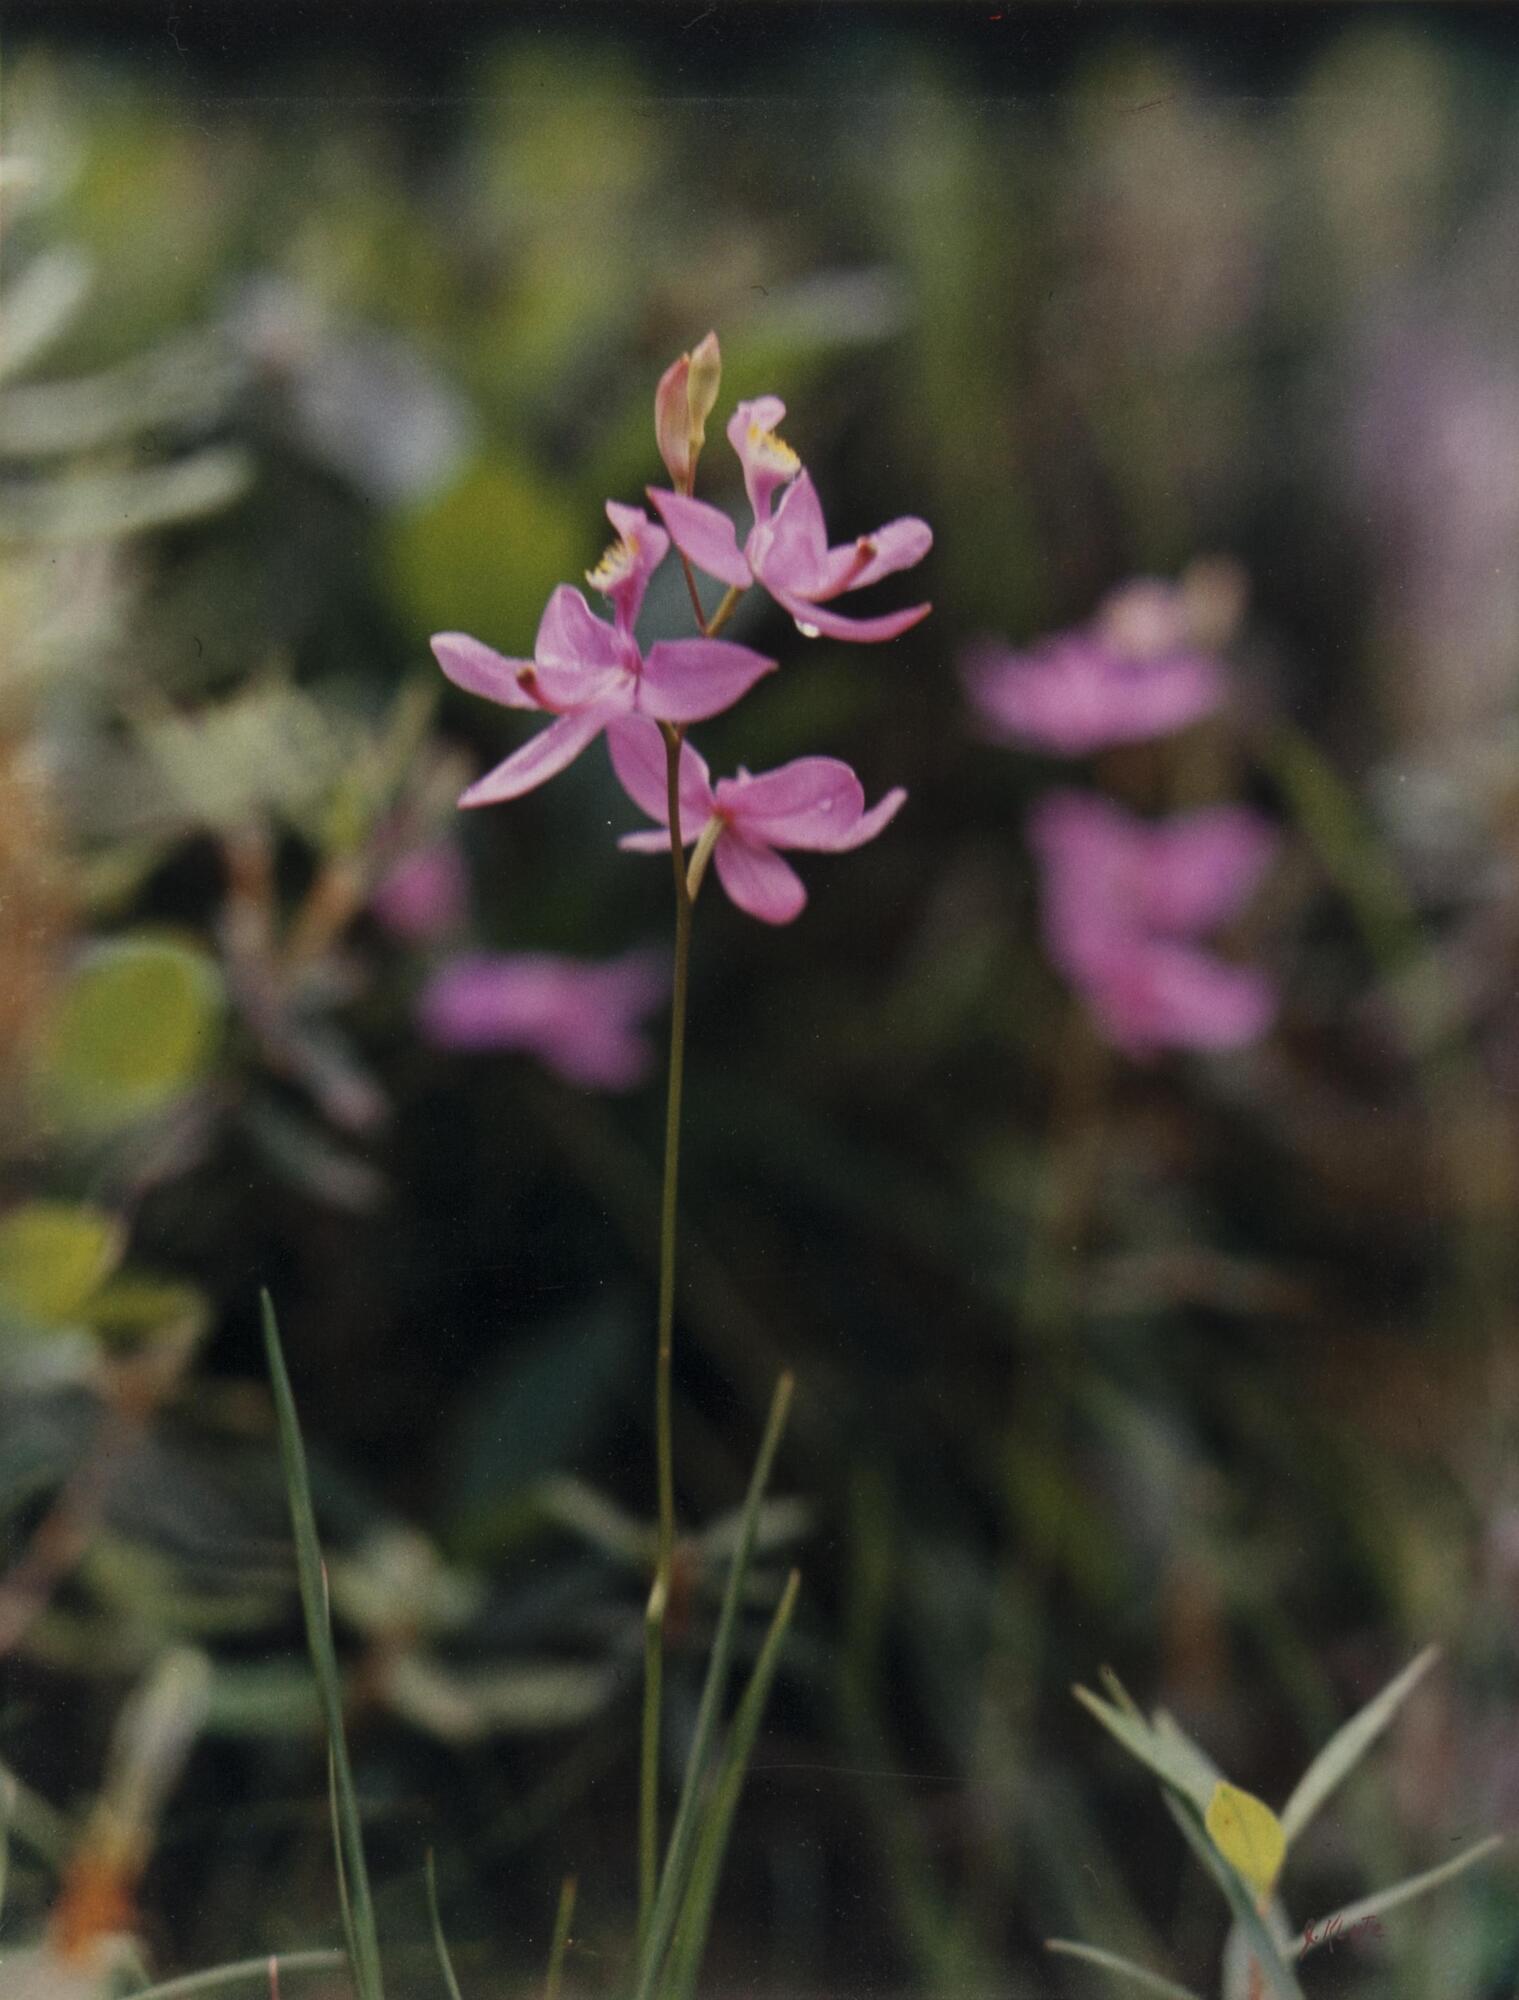 This color photograph focuses on a stem of pink flowers. The image has a shallow depth of field, creating a soft background in which more of the pink flowers are visible amidst other green and purple foliage.